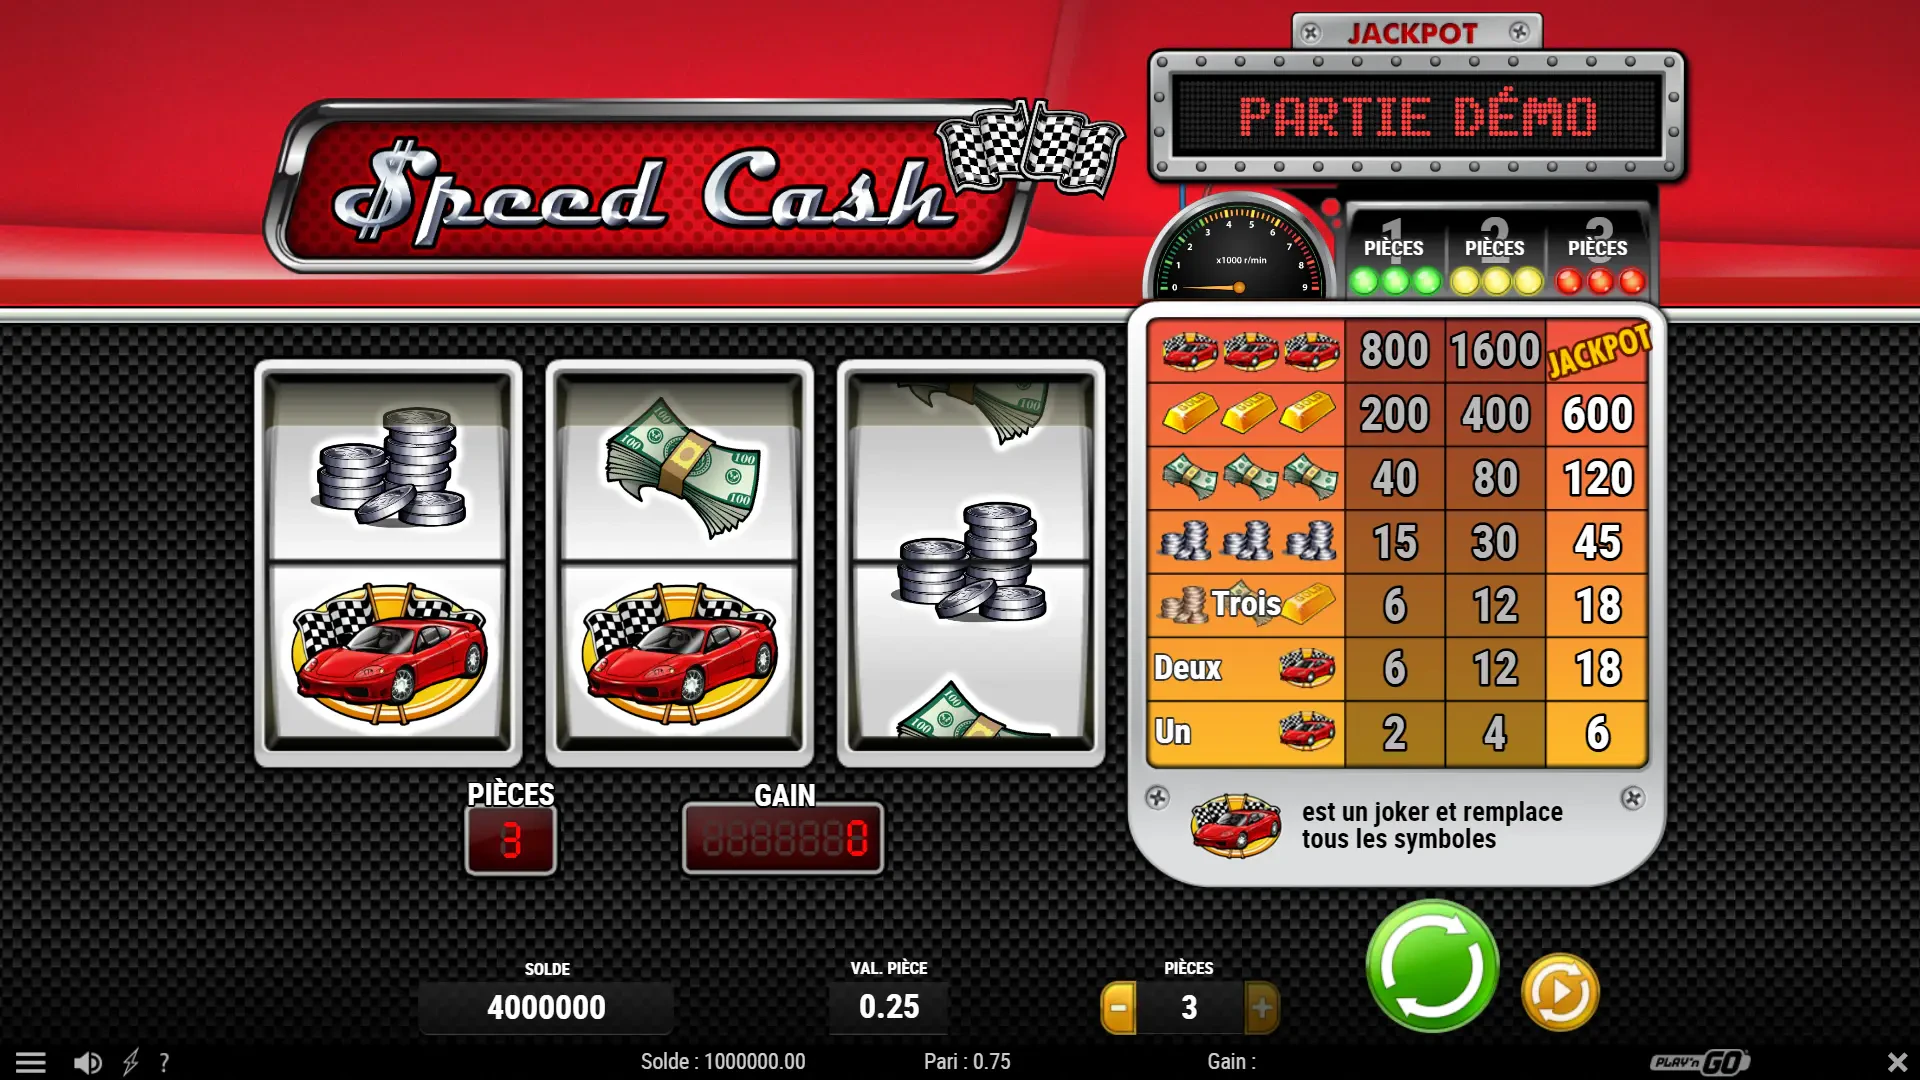 The Speed Cash slot machine by Play'n GO